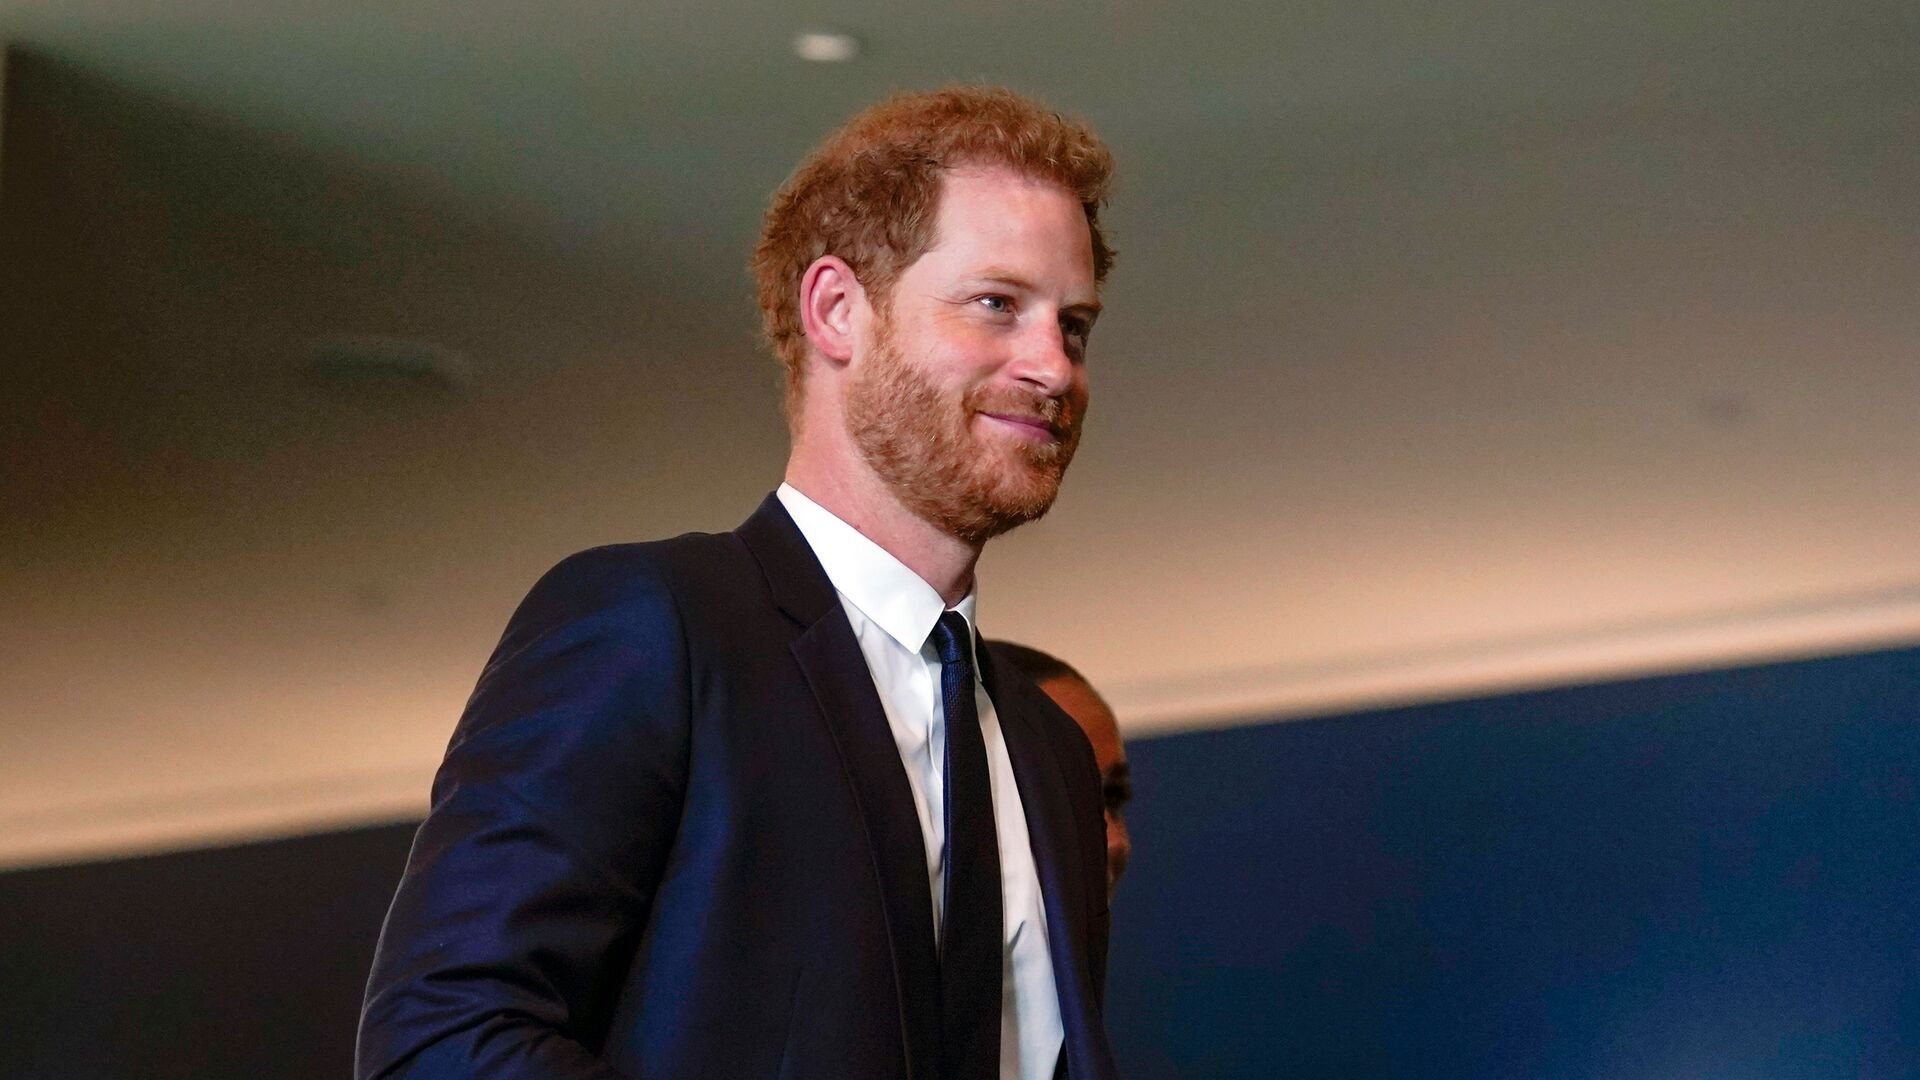 How Much Is Prince Harry Worth?